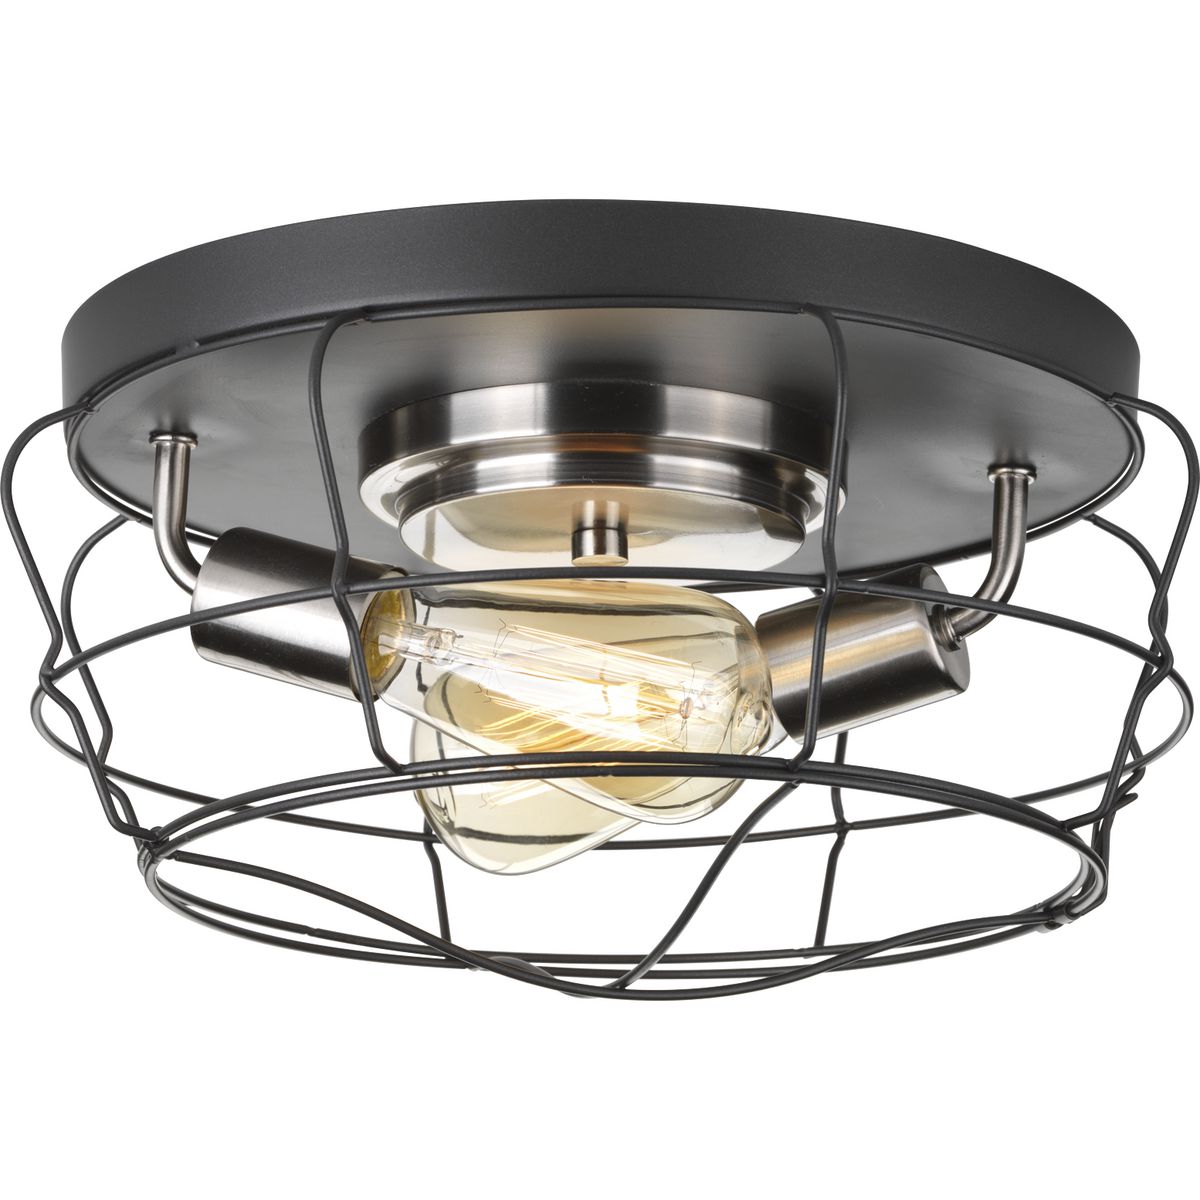 Inspired by industrial elements, Gauge two-light flush mount features an open cage design that's both functional and aesthetically appealing. Frame is comprised of a Graphite finished wire frame with Brushed Nickel accents. Hinged door provides easy access to change lamp.